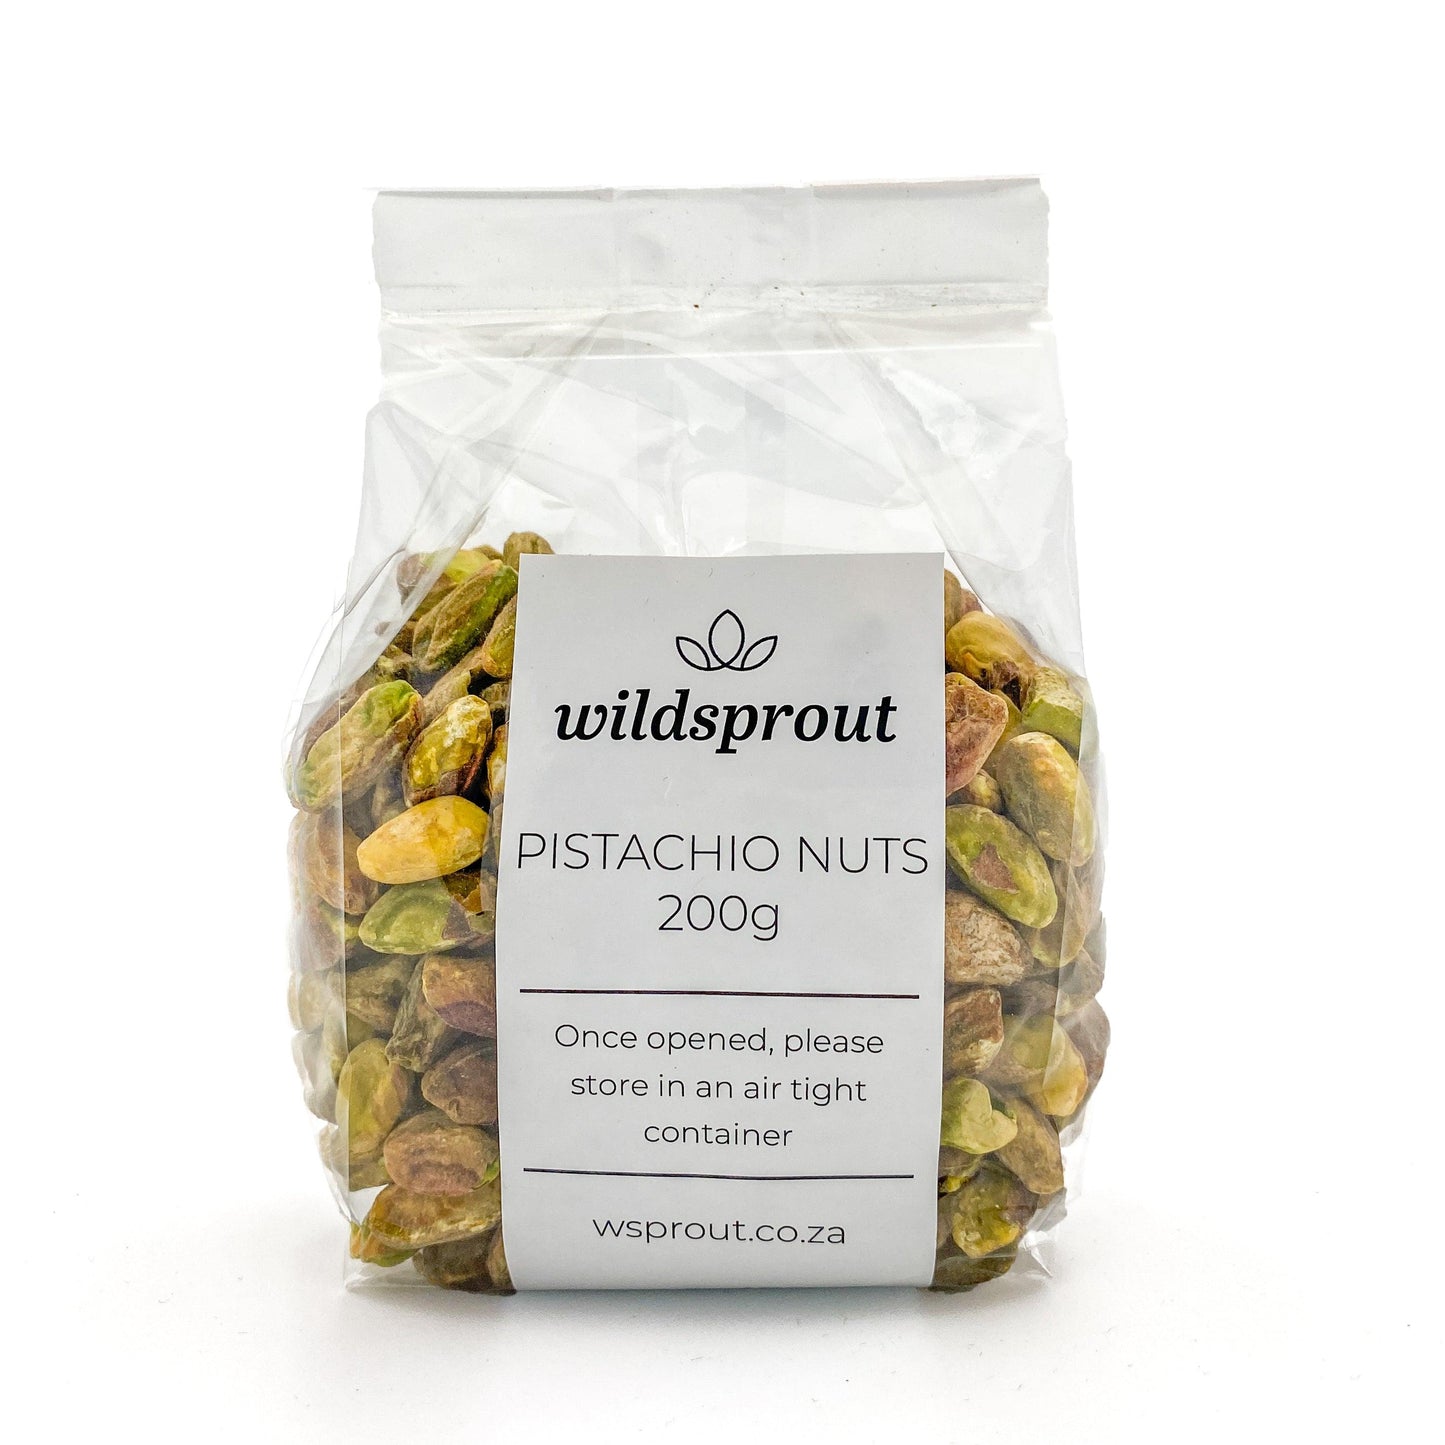 Pistachio Nuts 200g - Wildsprout